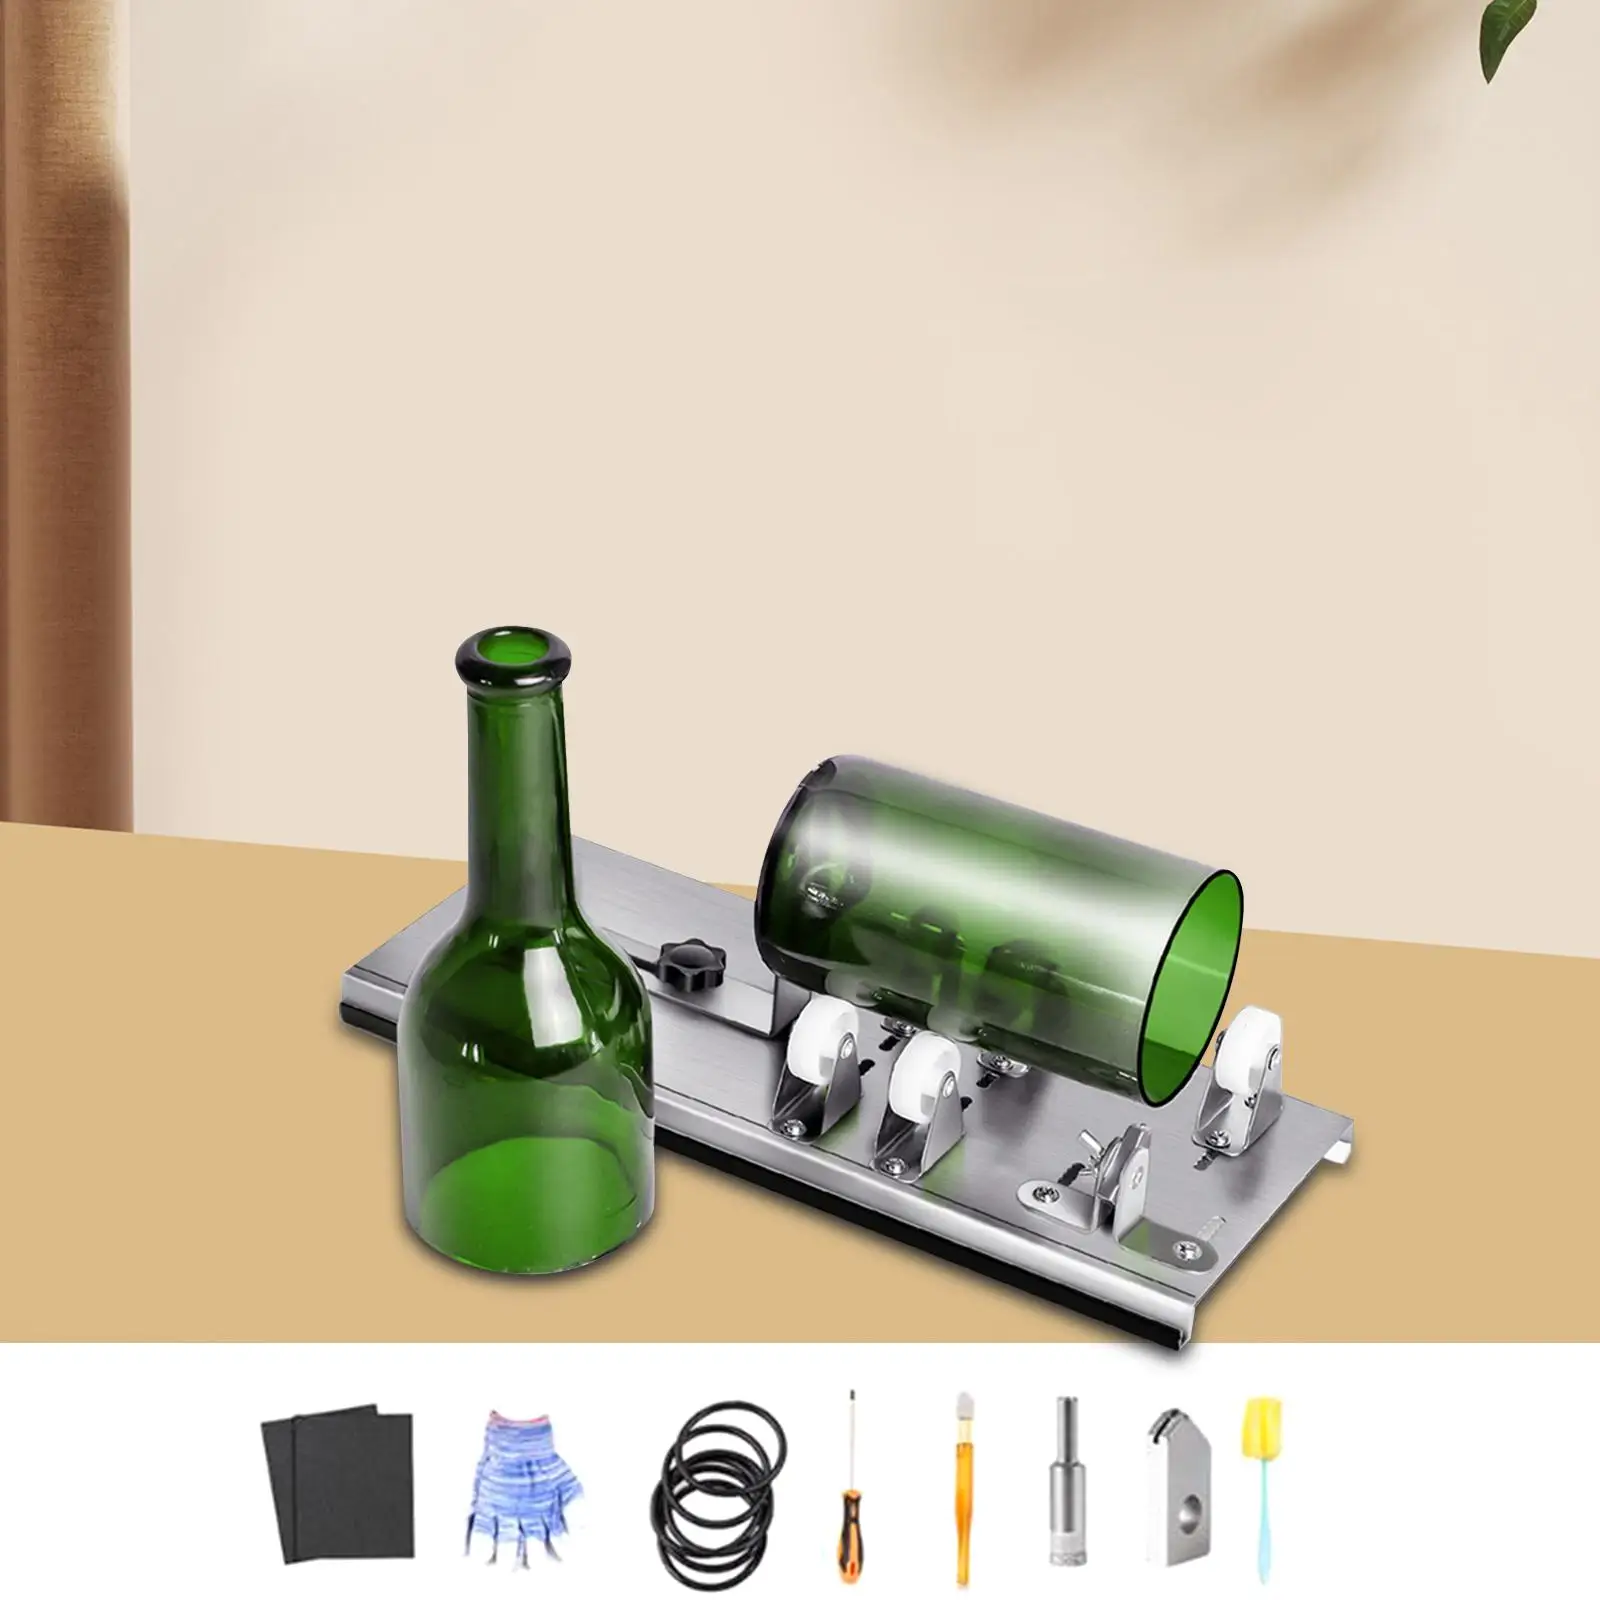 Glass Bottle Cutter Cutting Machine Beer Glass Bottle DIY for Vases Candle Holders